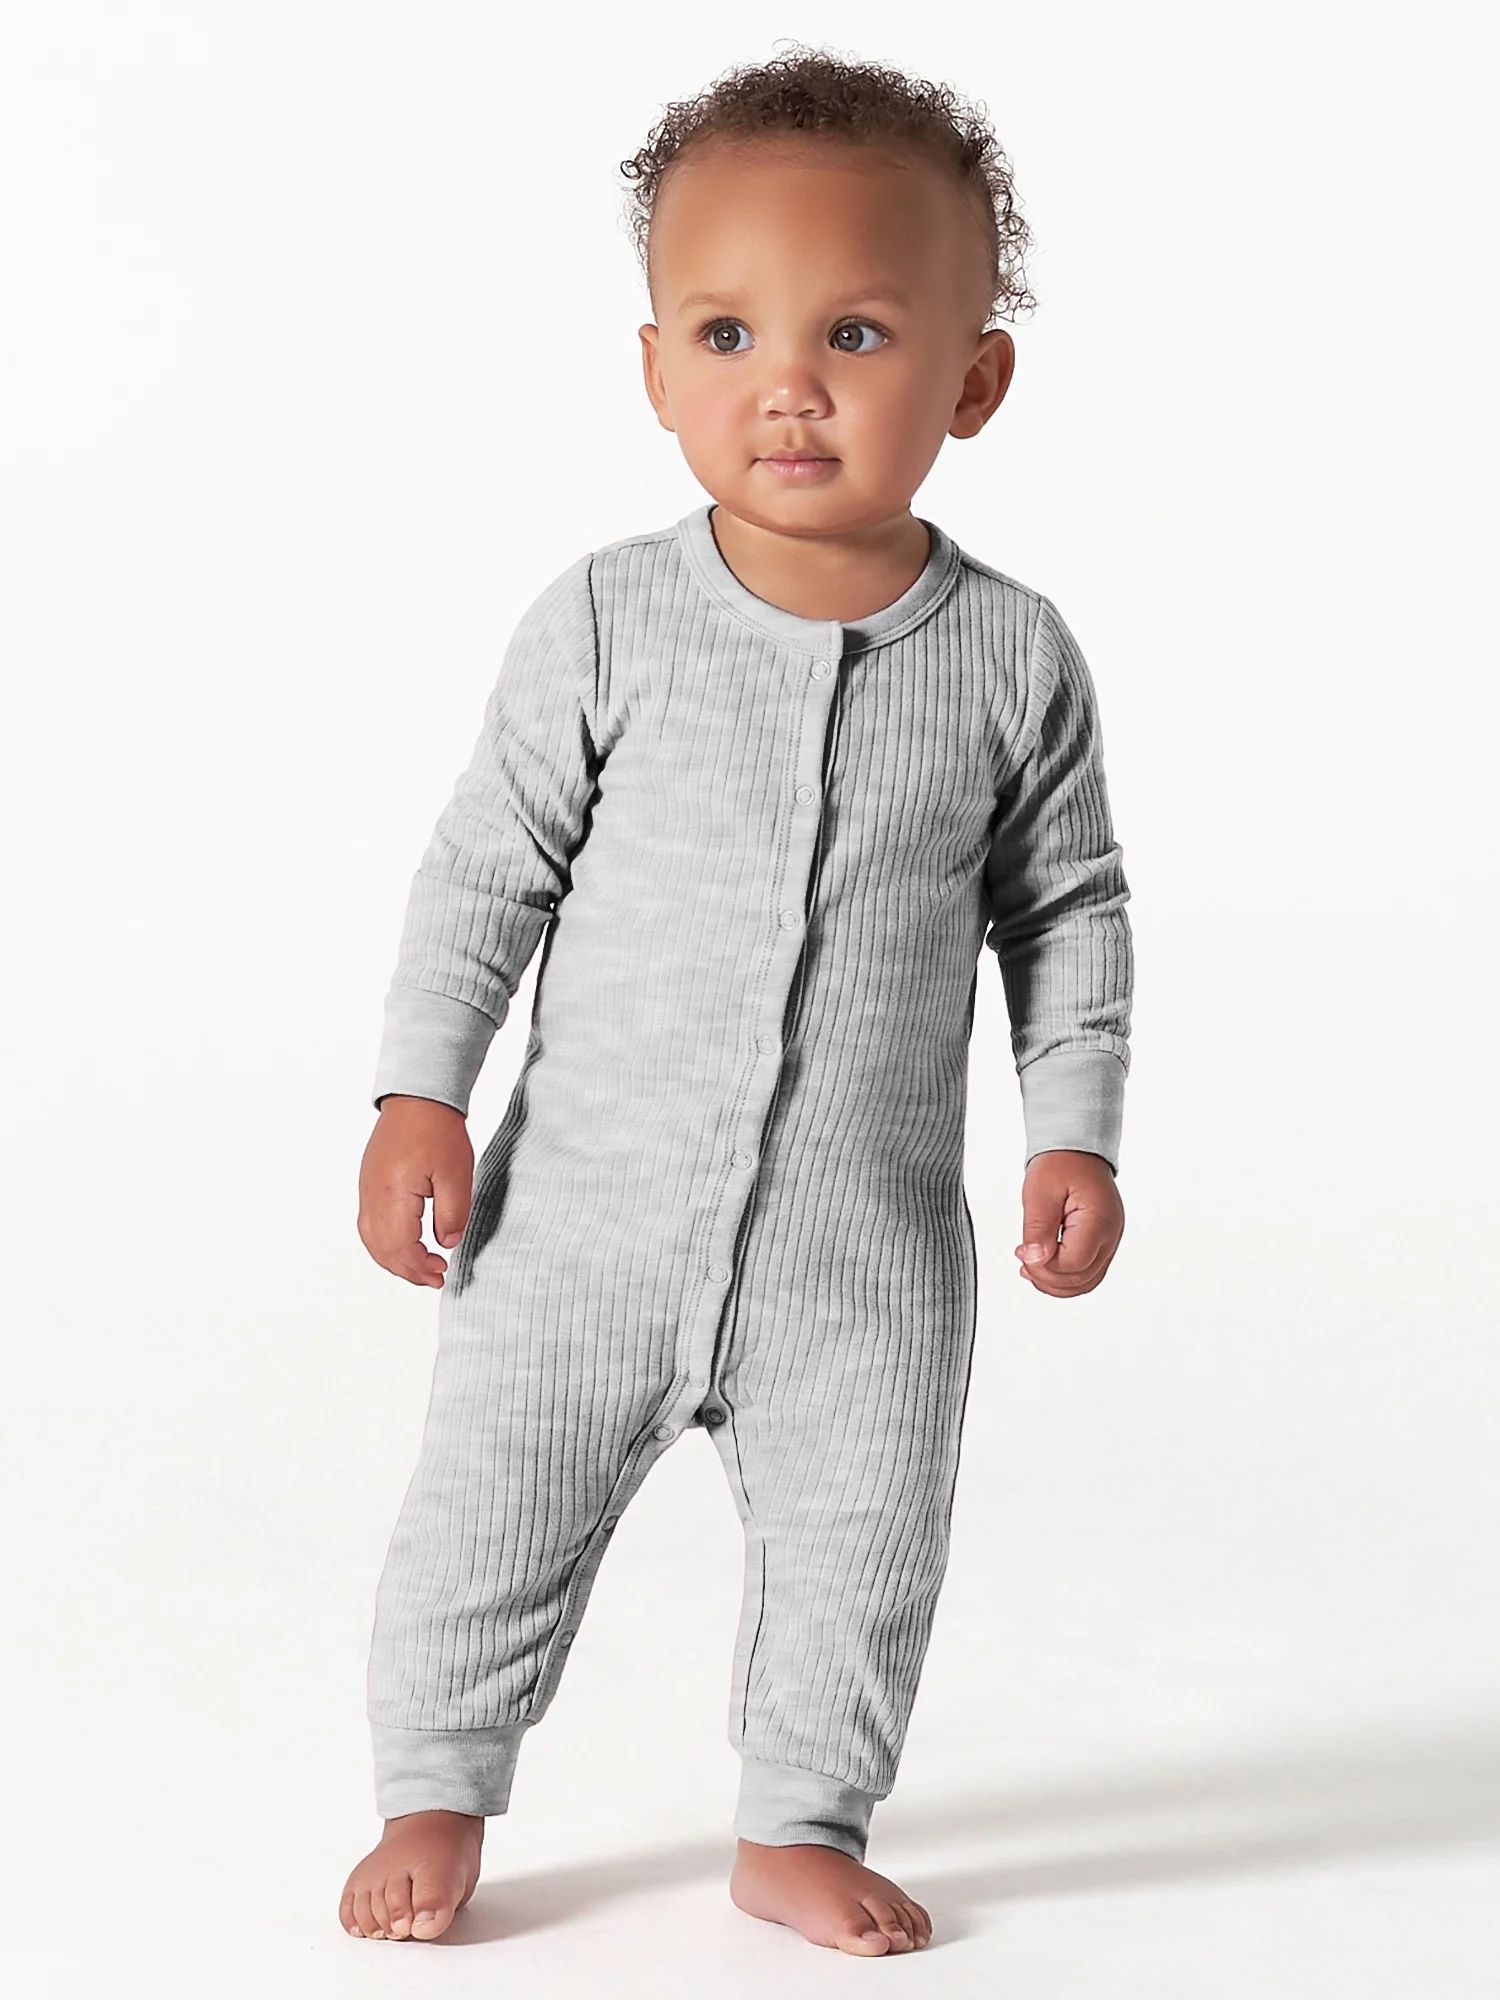 Modern Moments by Gerber Baby Boy or Girl Unisex Coverall, Sizes Newborn-12M | Walmart (US)